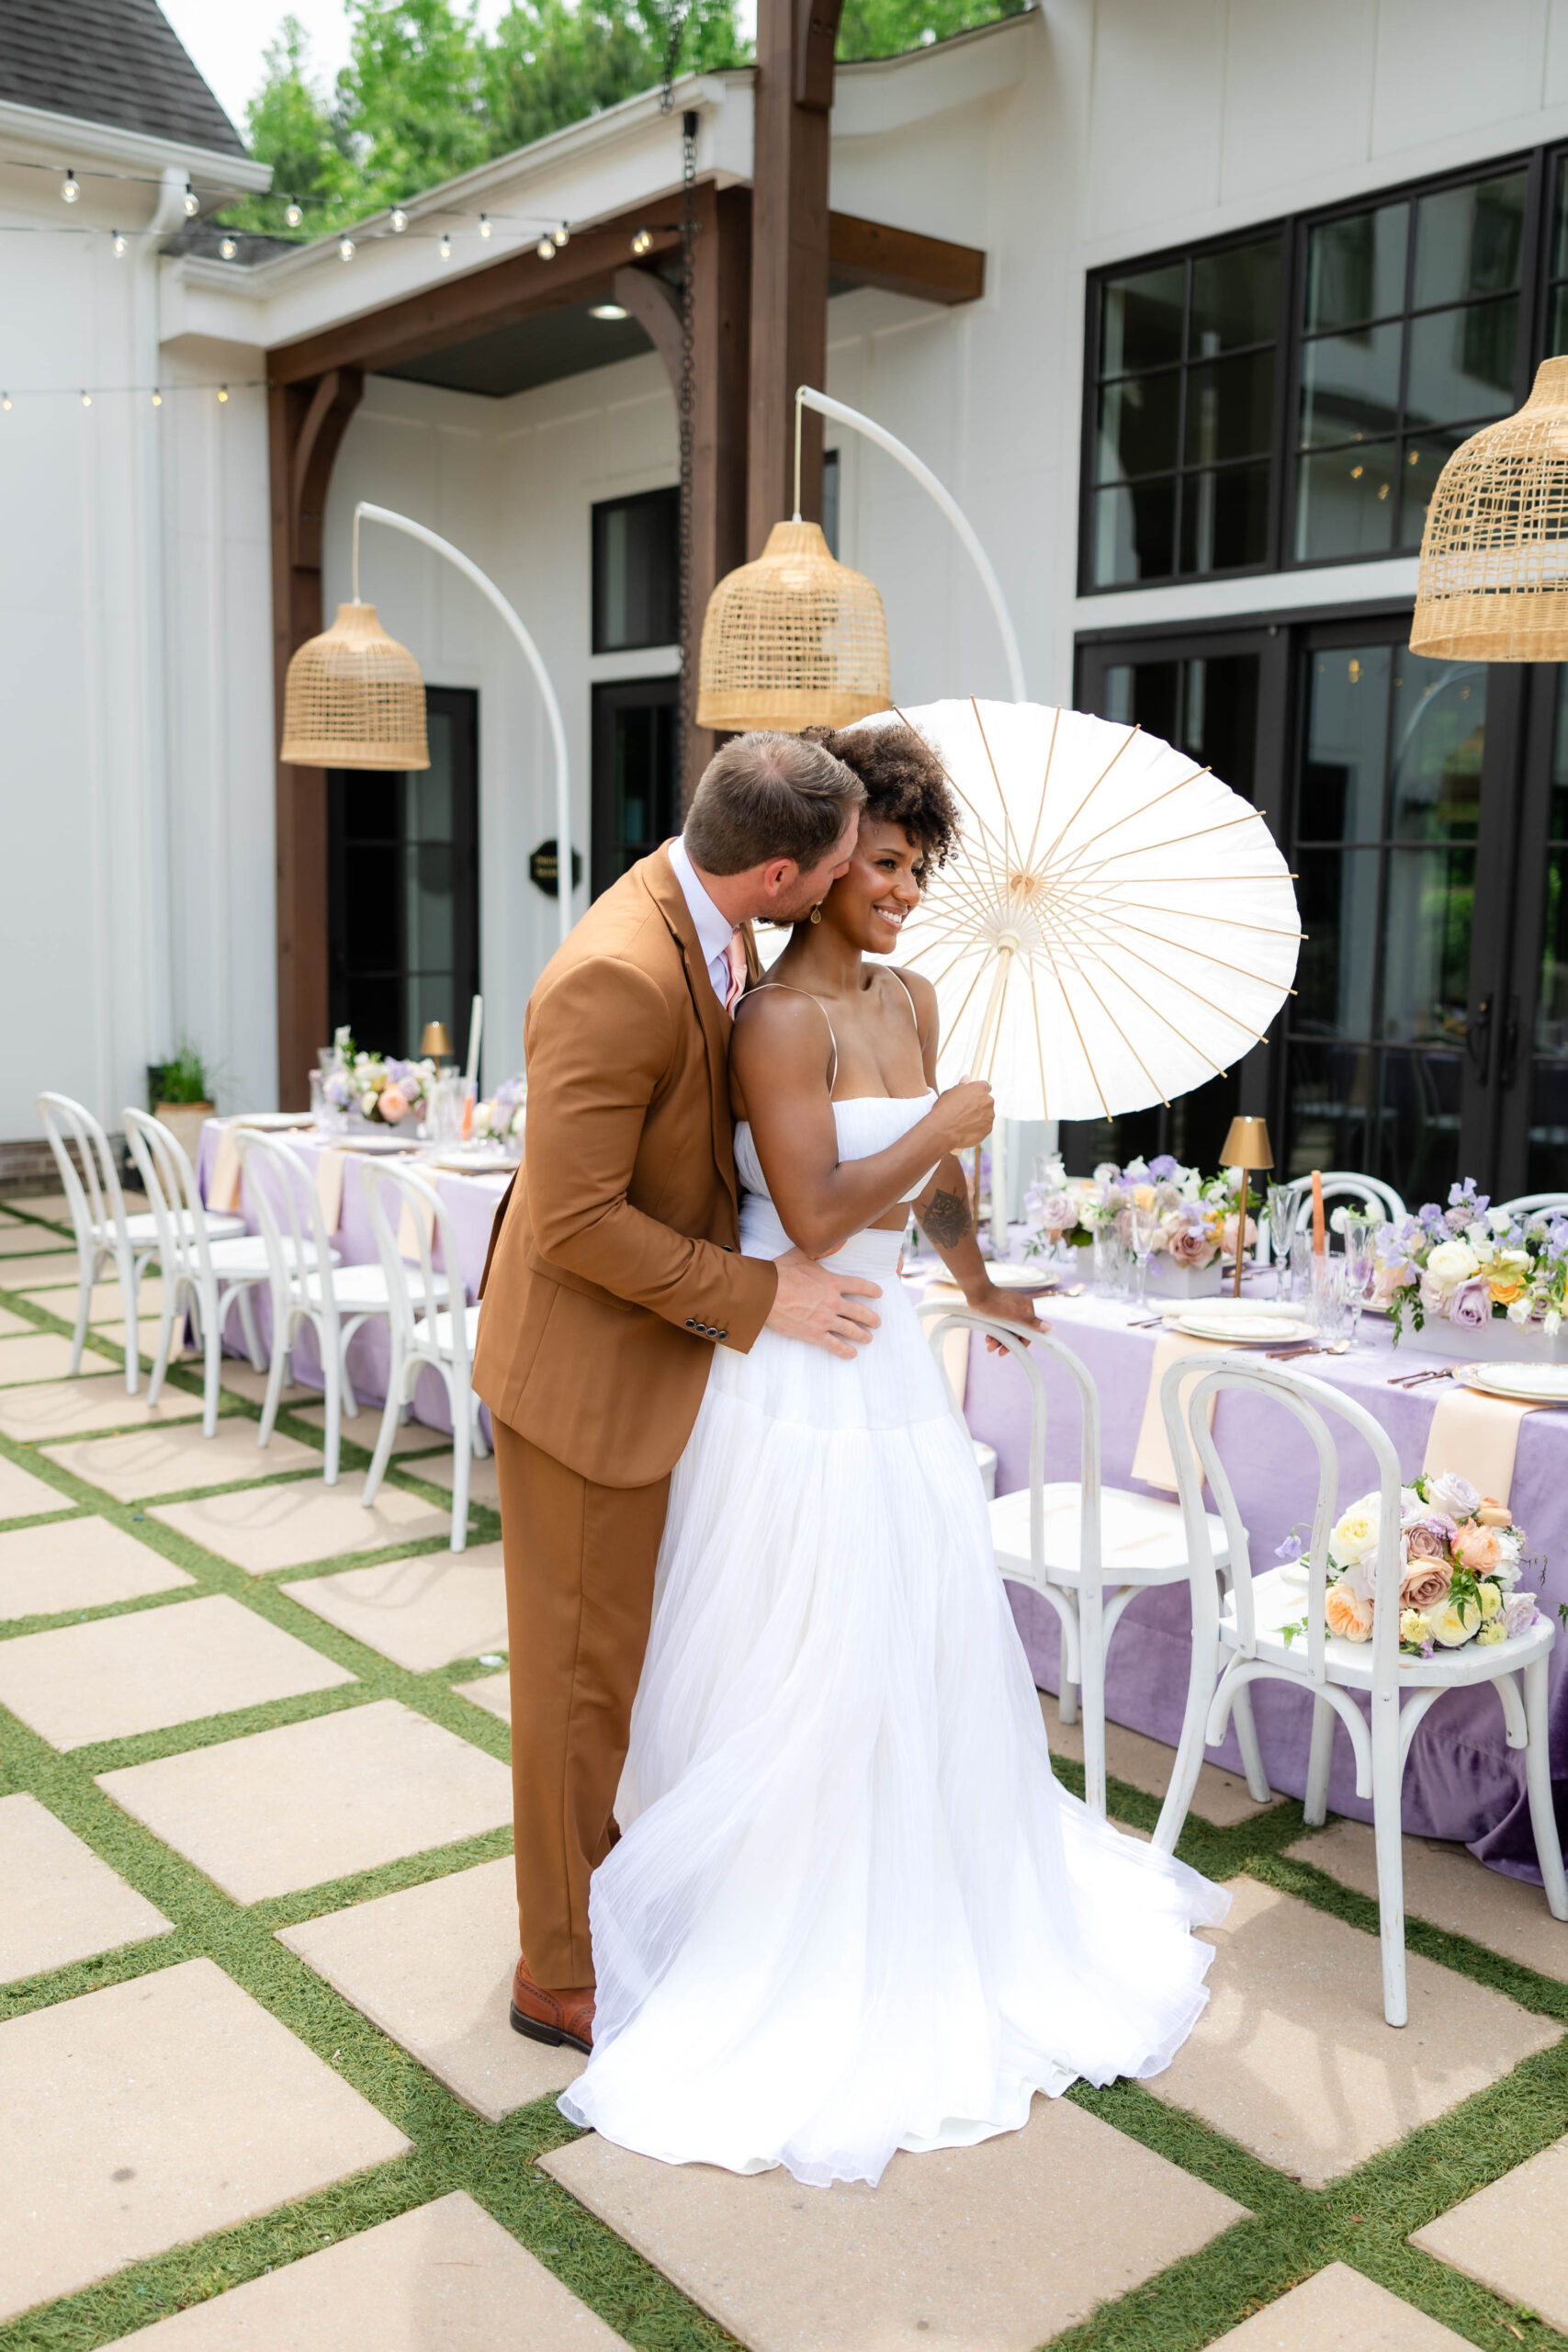 Bride and groom standing next to reception table. Bride holding a parasol. Groom leaning in to kiss the Bride's neck.